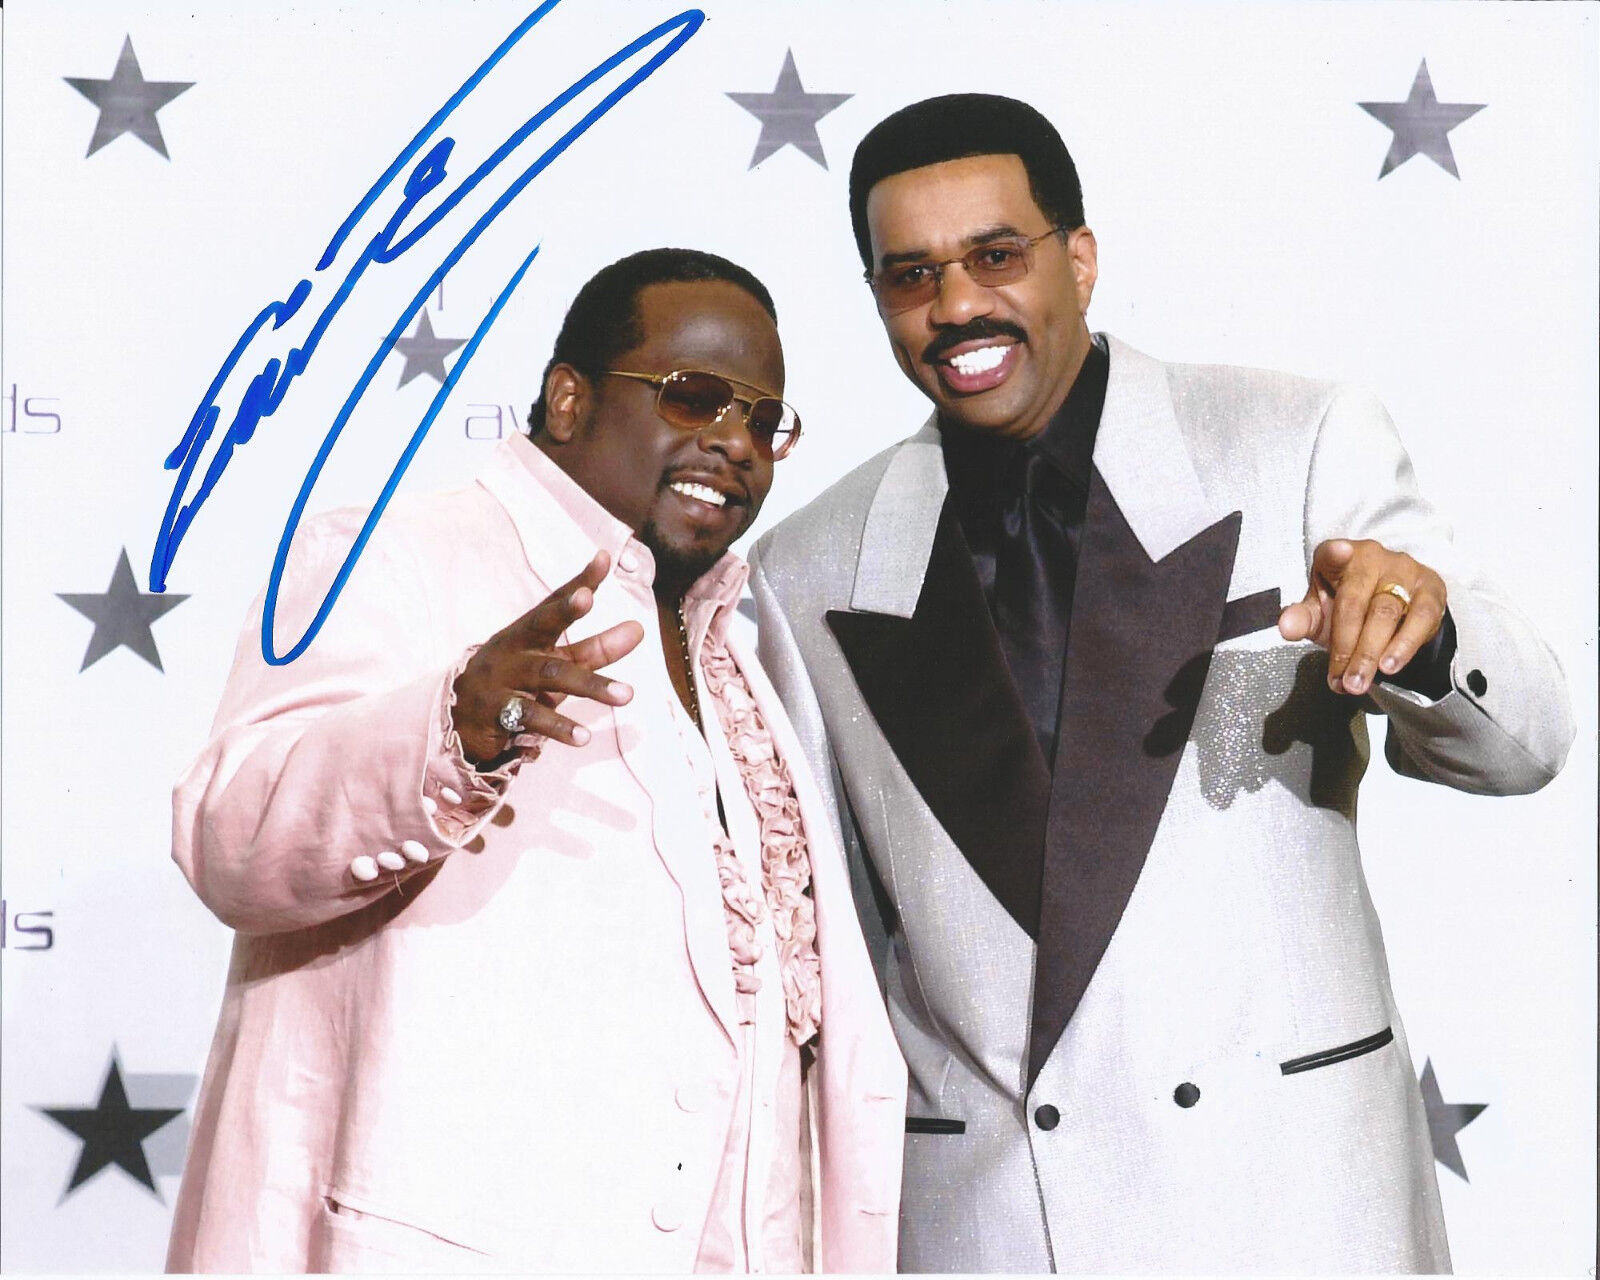 ACTOR COMEDIAN CEDRIC THE ENTERTAINER SIGNED 8X10 Photo Poster painting W/COA KYLES STEVE HARVEY